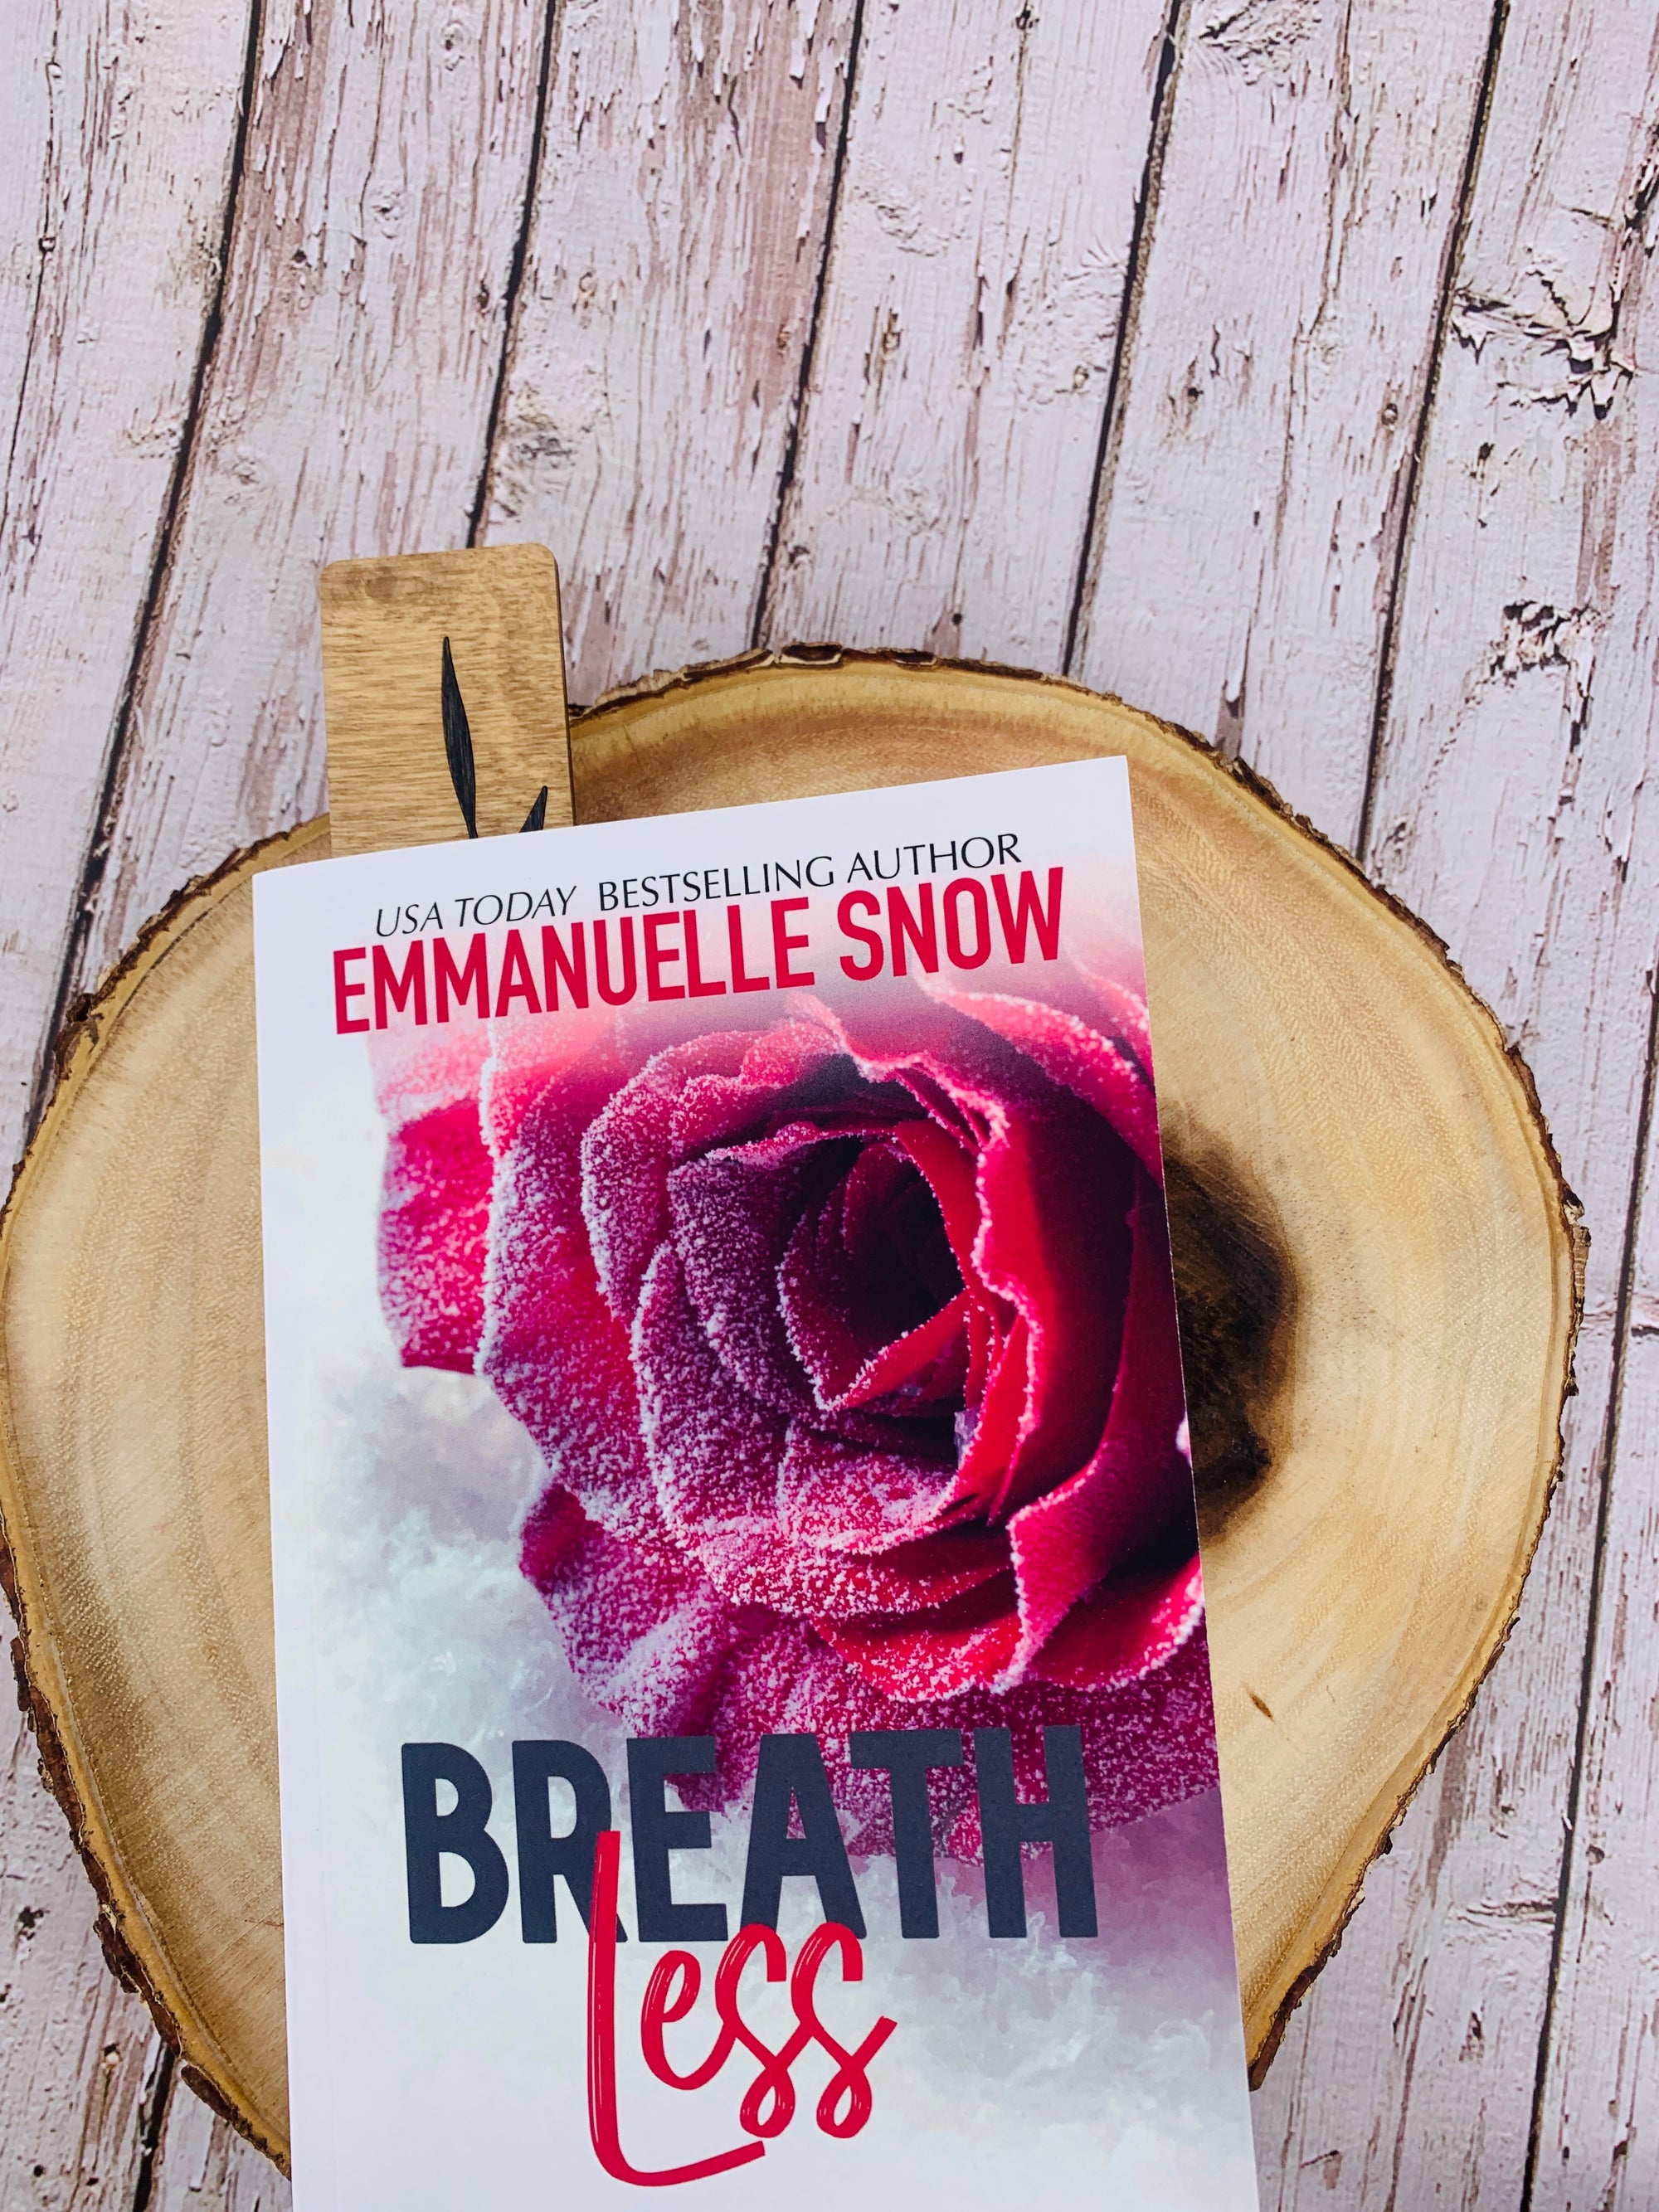 Breathless Emmanuelle Snow Bookmark Pale Natural Wooden Free-Shipping